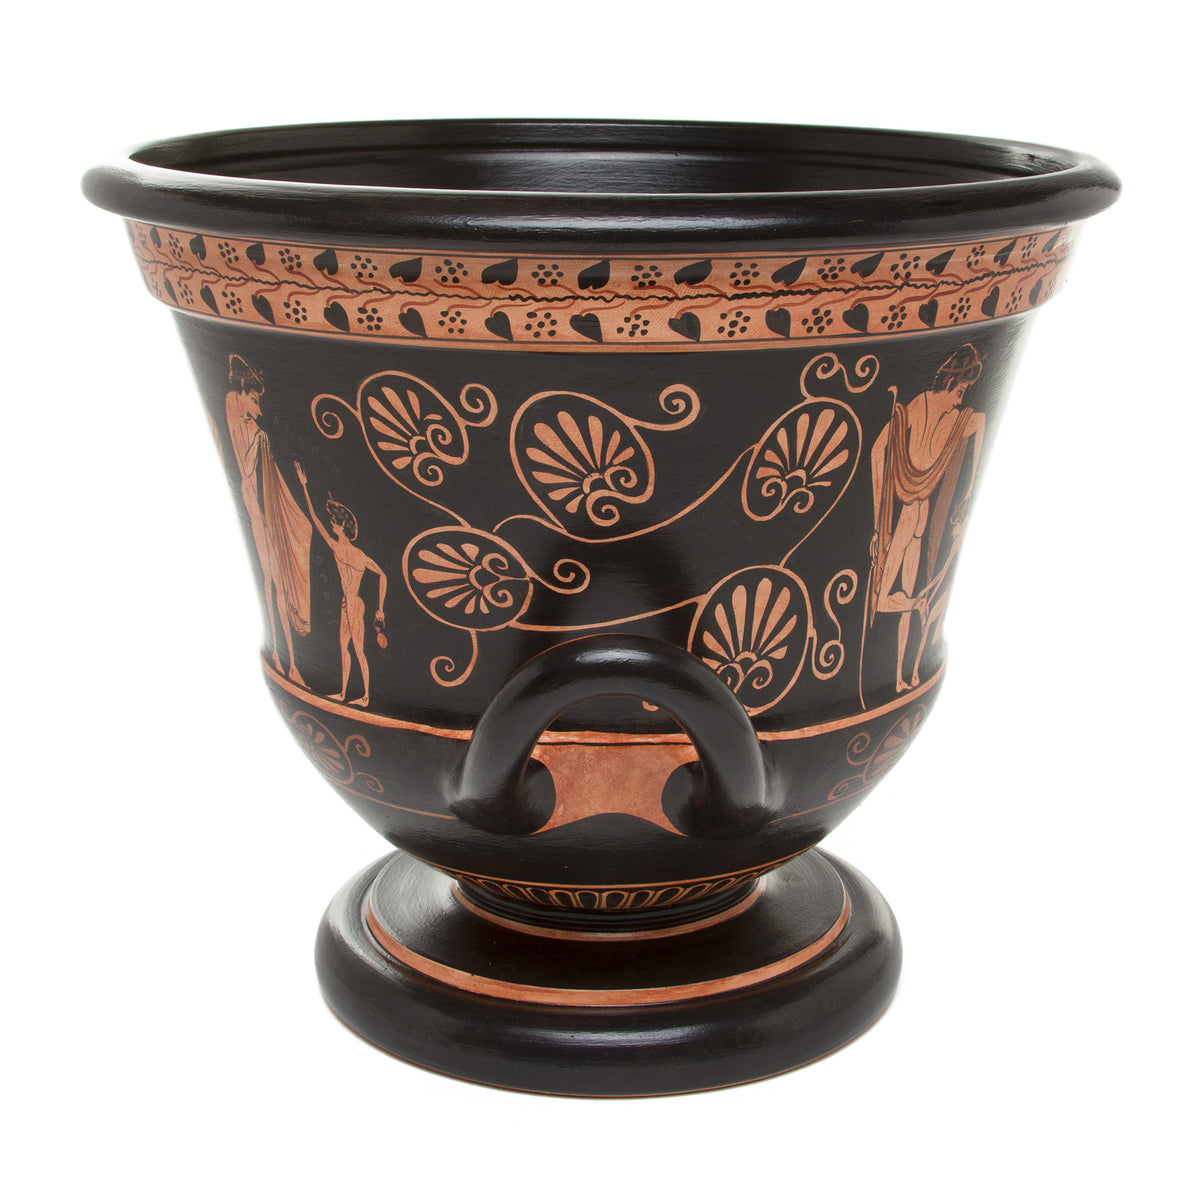 Greek Krater Vase-Red Figure Olympic Games | Getty Store